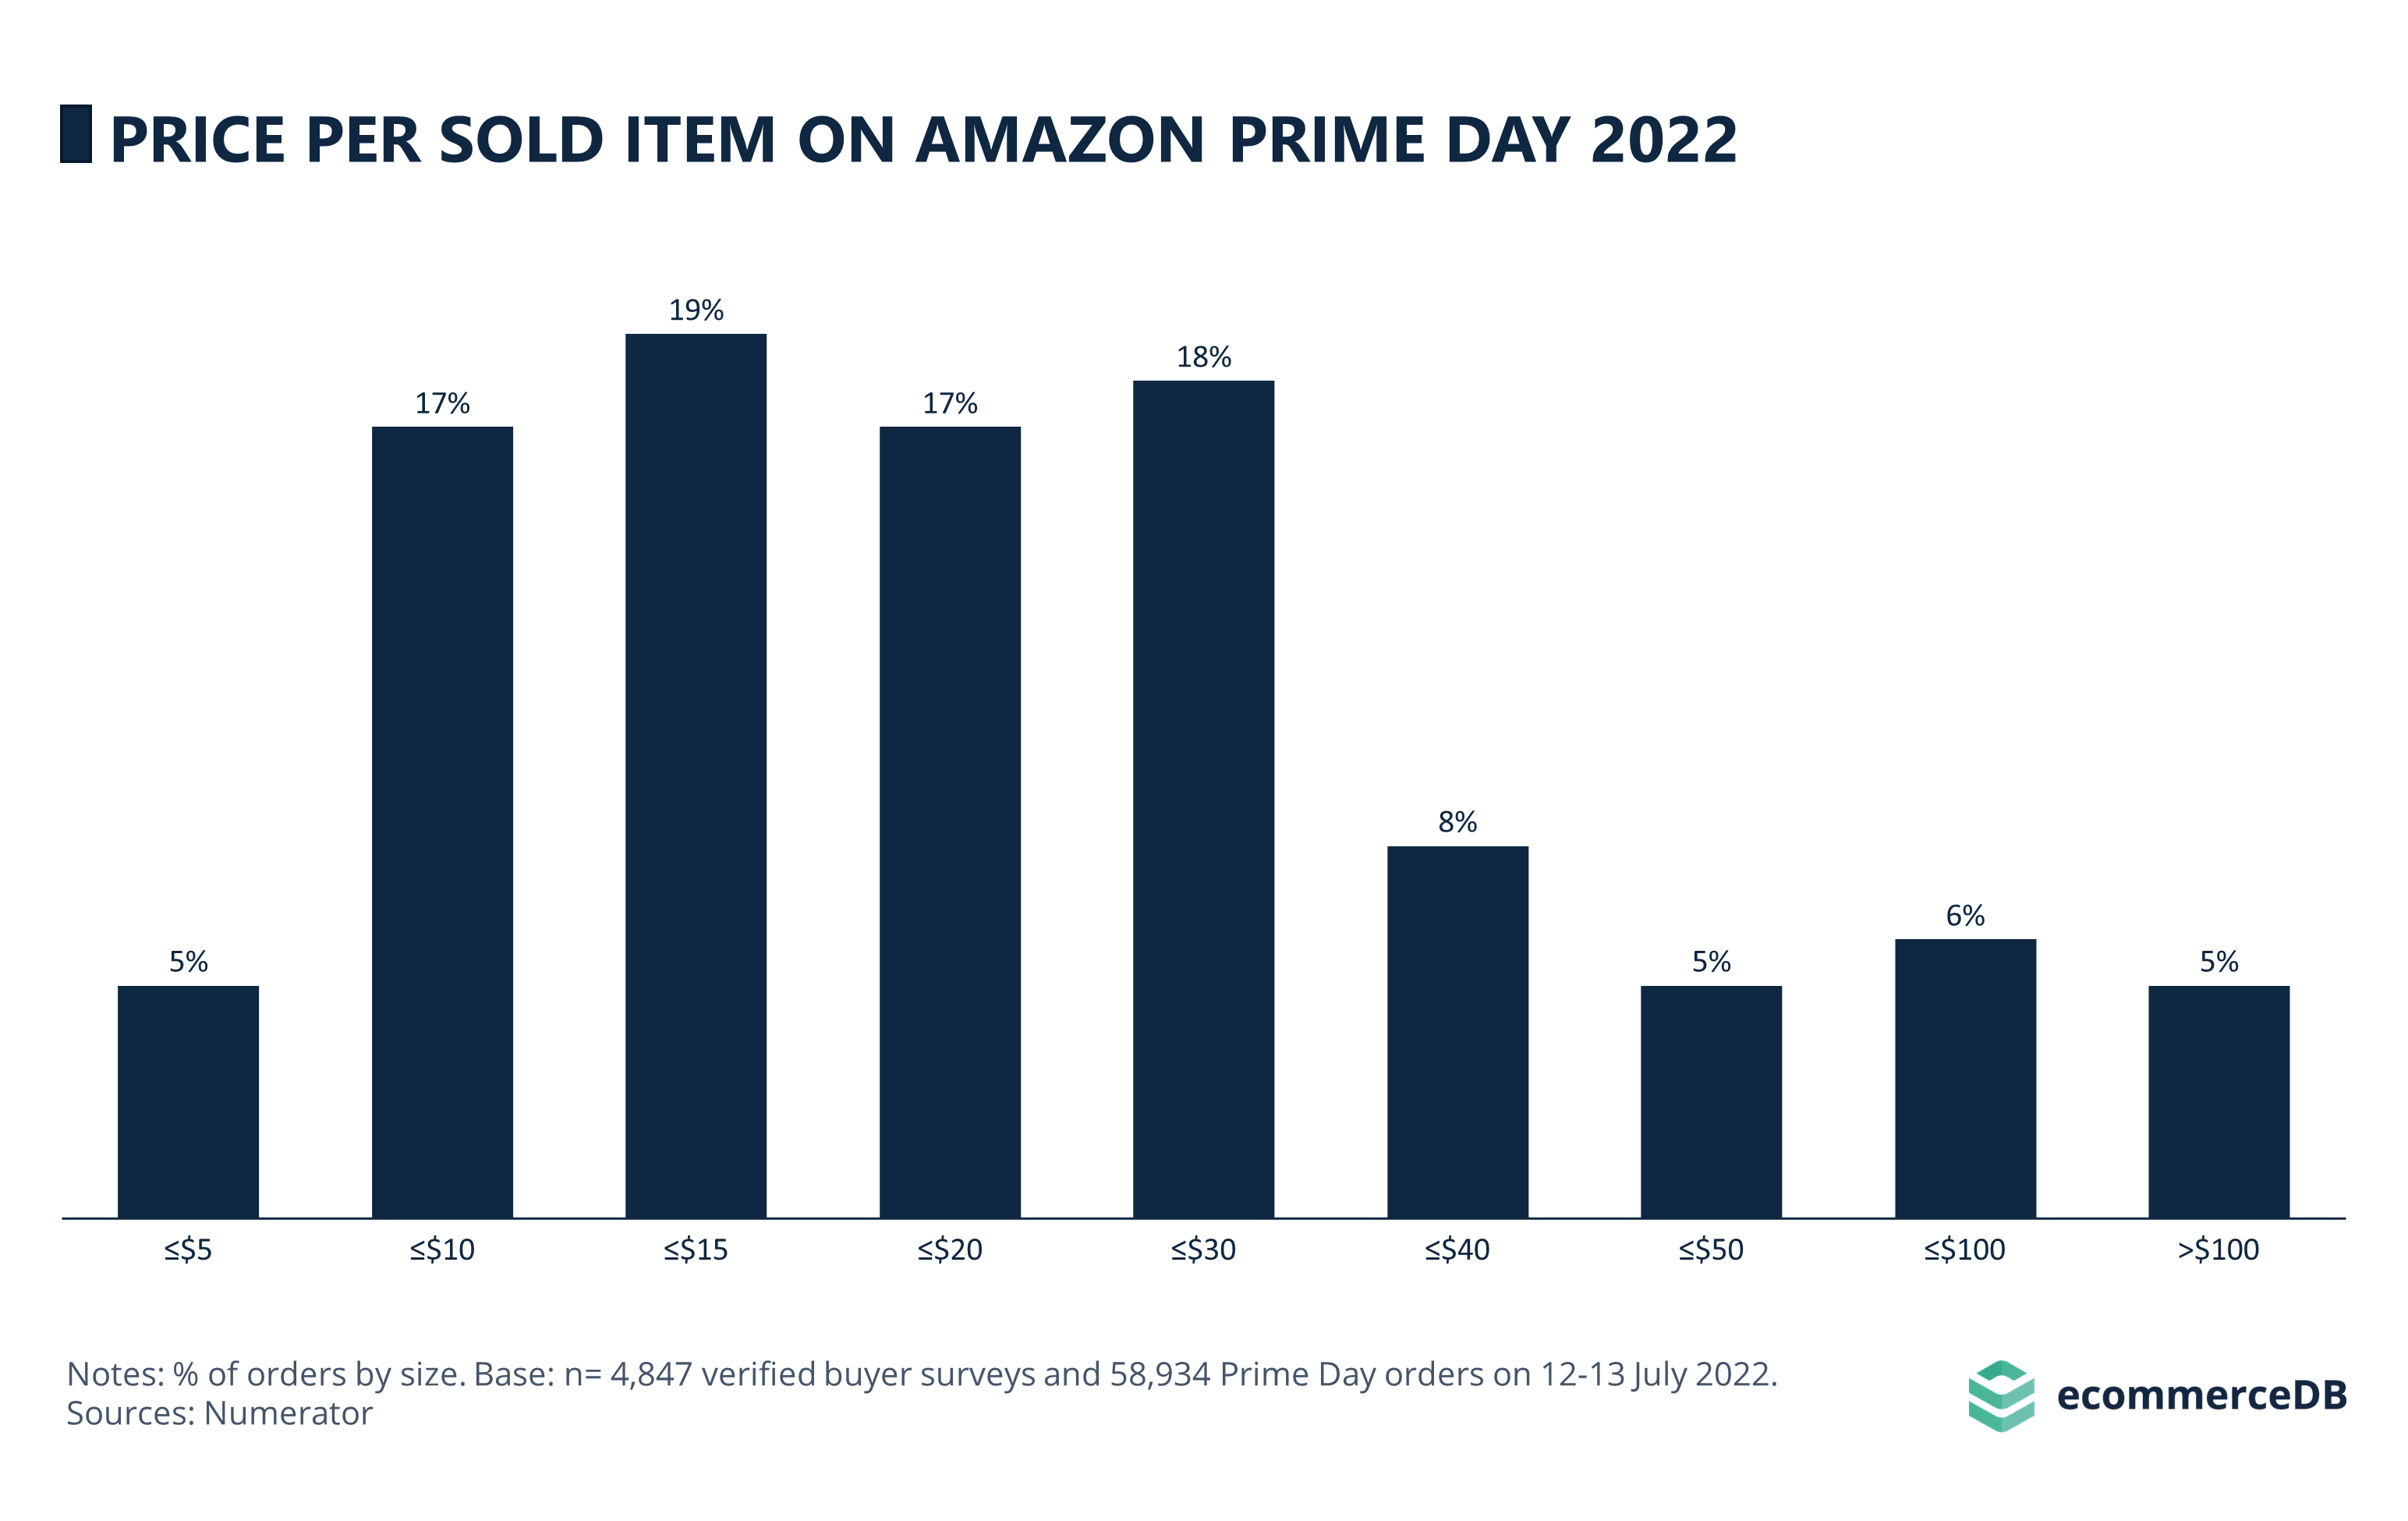 Prices of Sold Items on Amazon Prime Day 2022